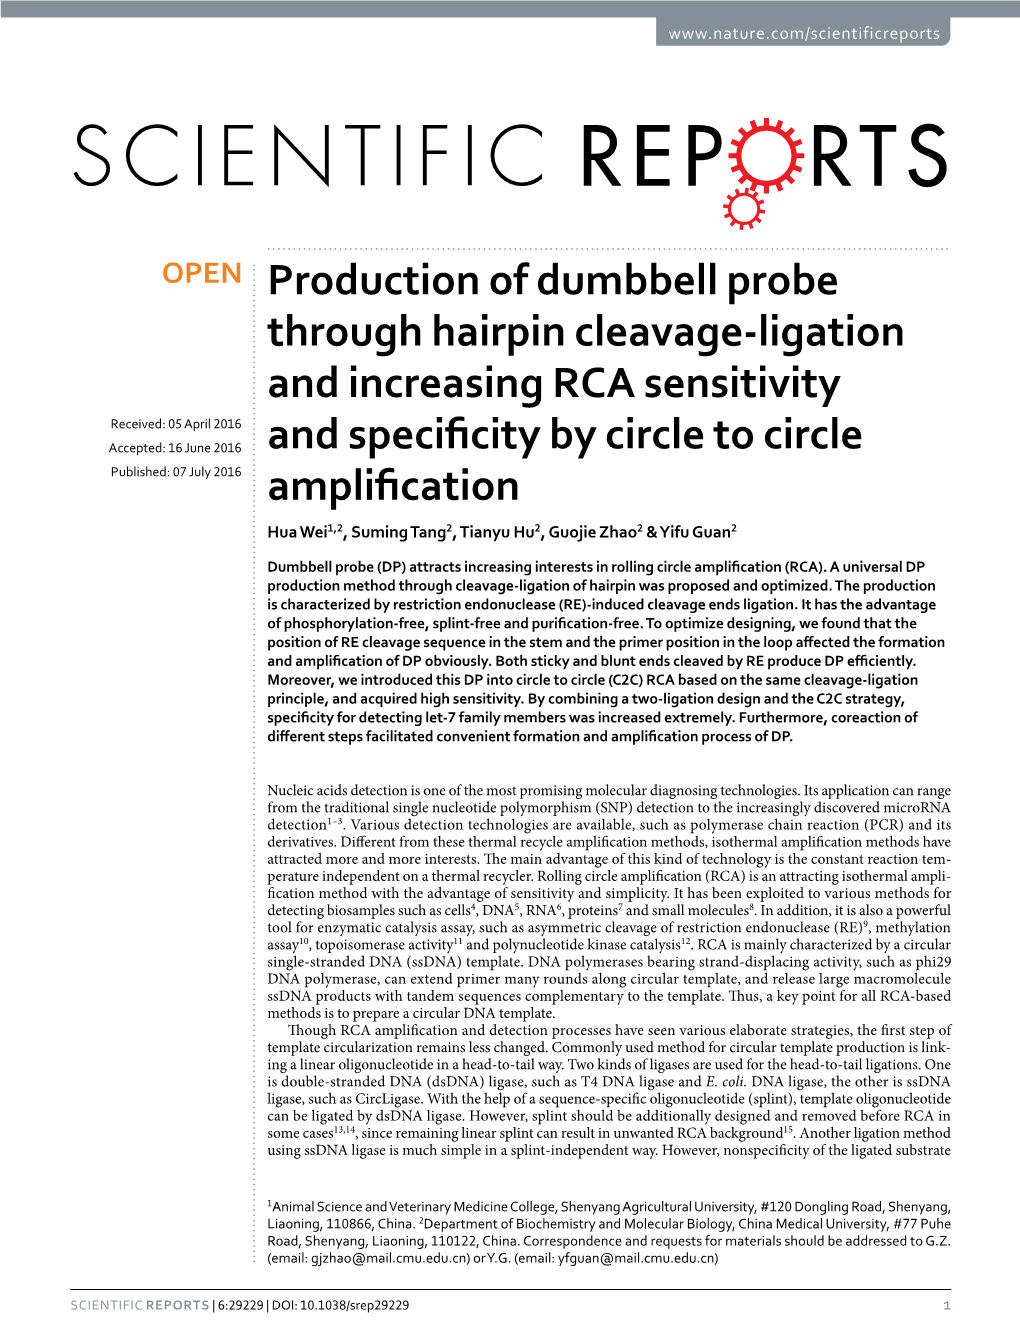 Production of Dumbbell Probe Through Hairpin Cleavage-Ligation And